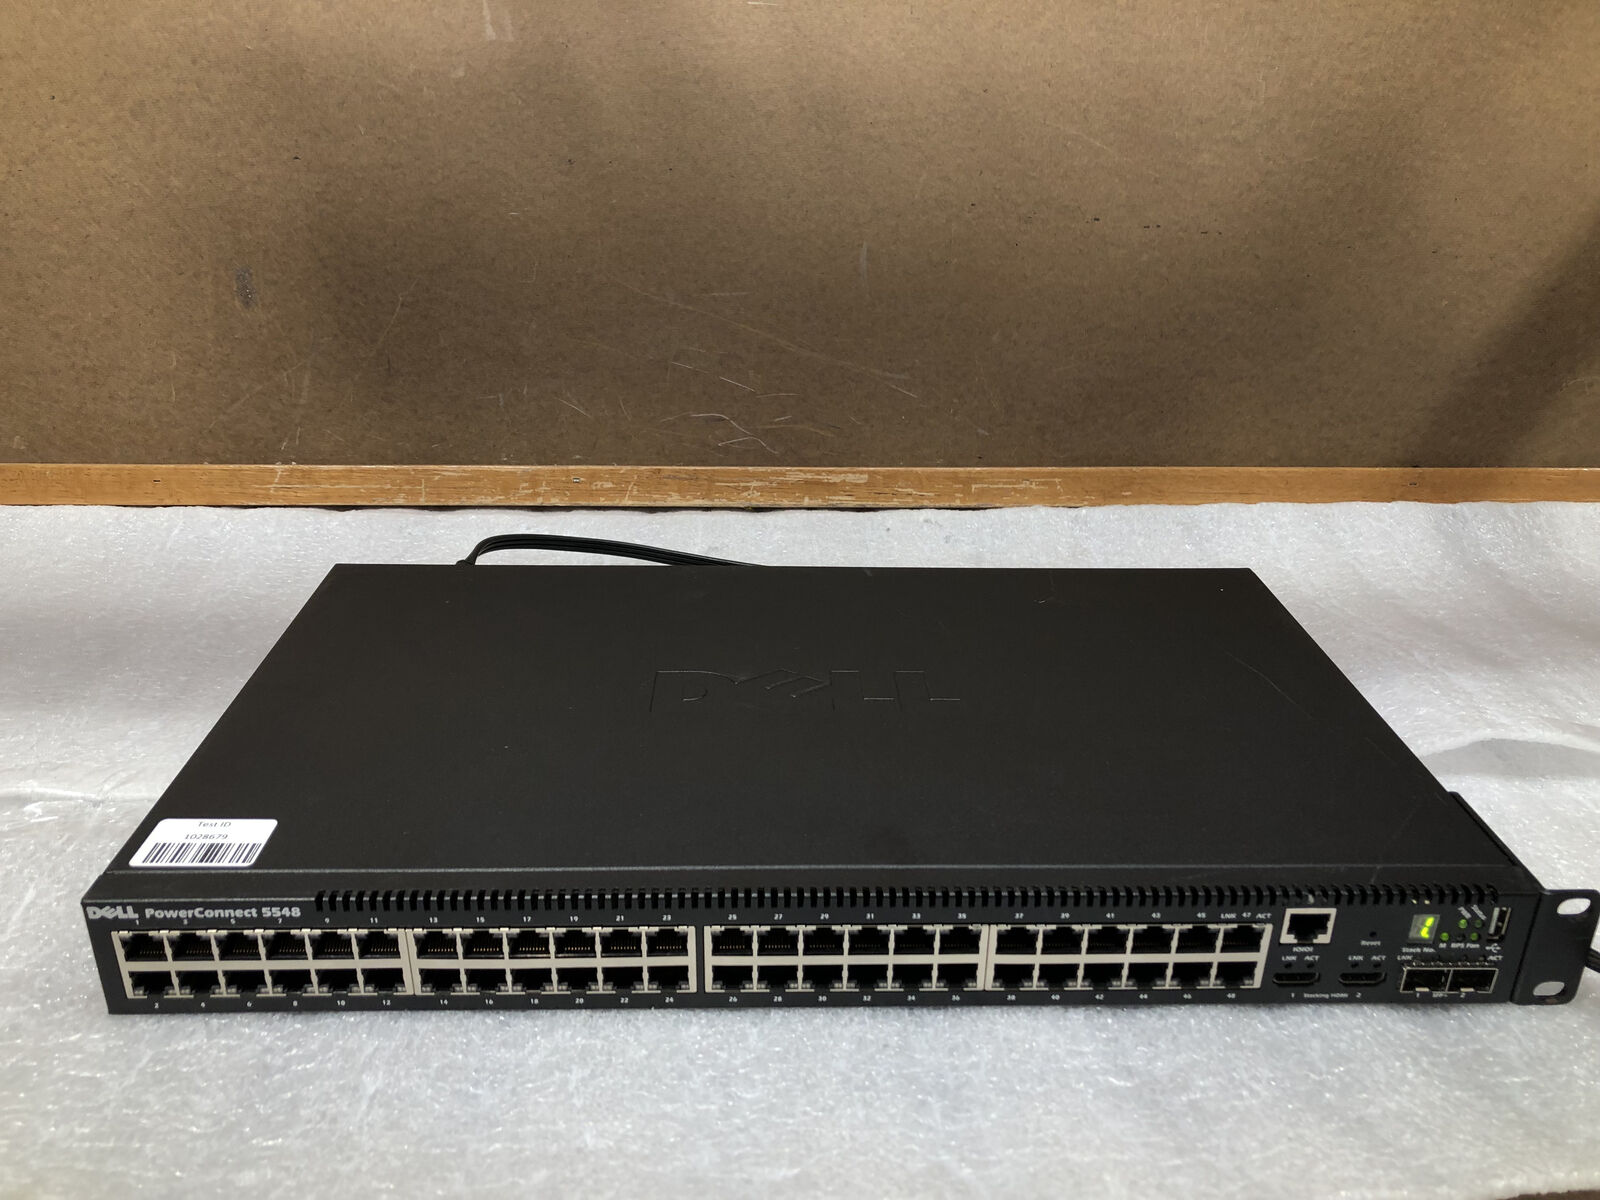 Dell PowerConnect 5548 48-Port Gigabit PoE Ethernet Managed Switch -TESTED/RESET